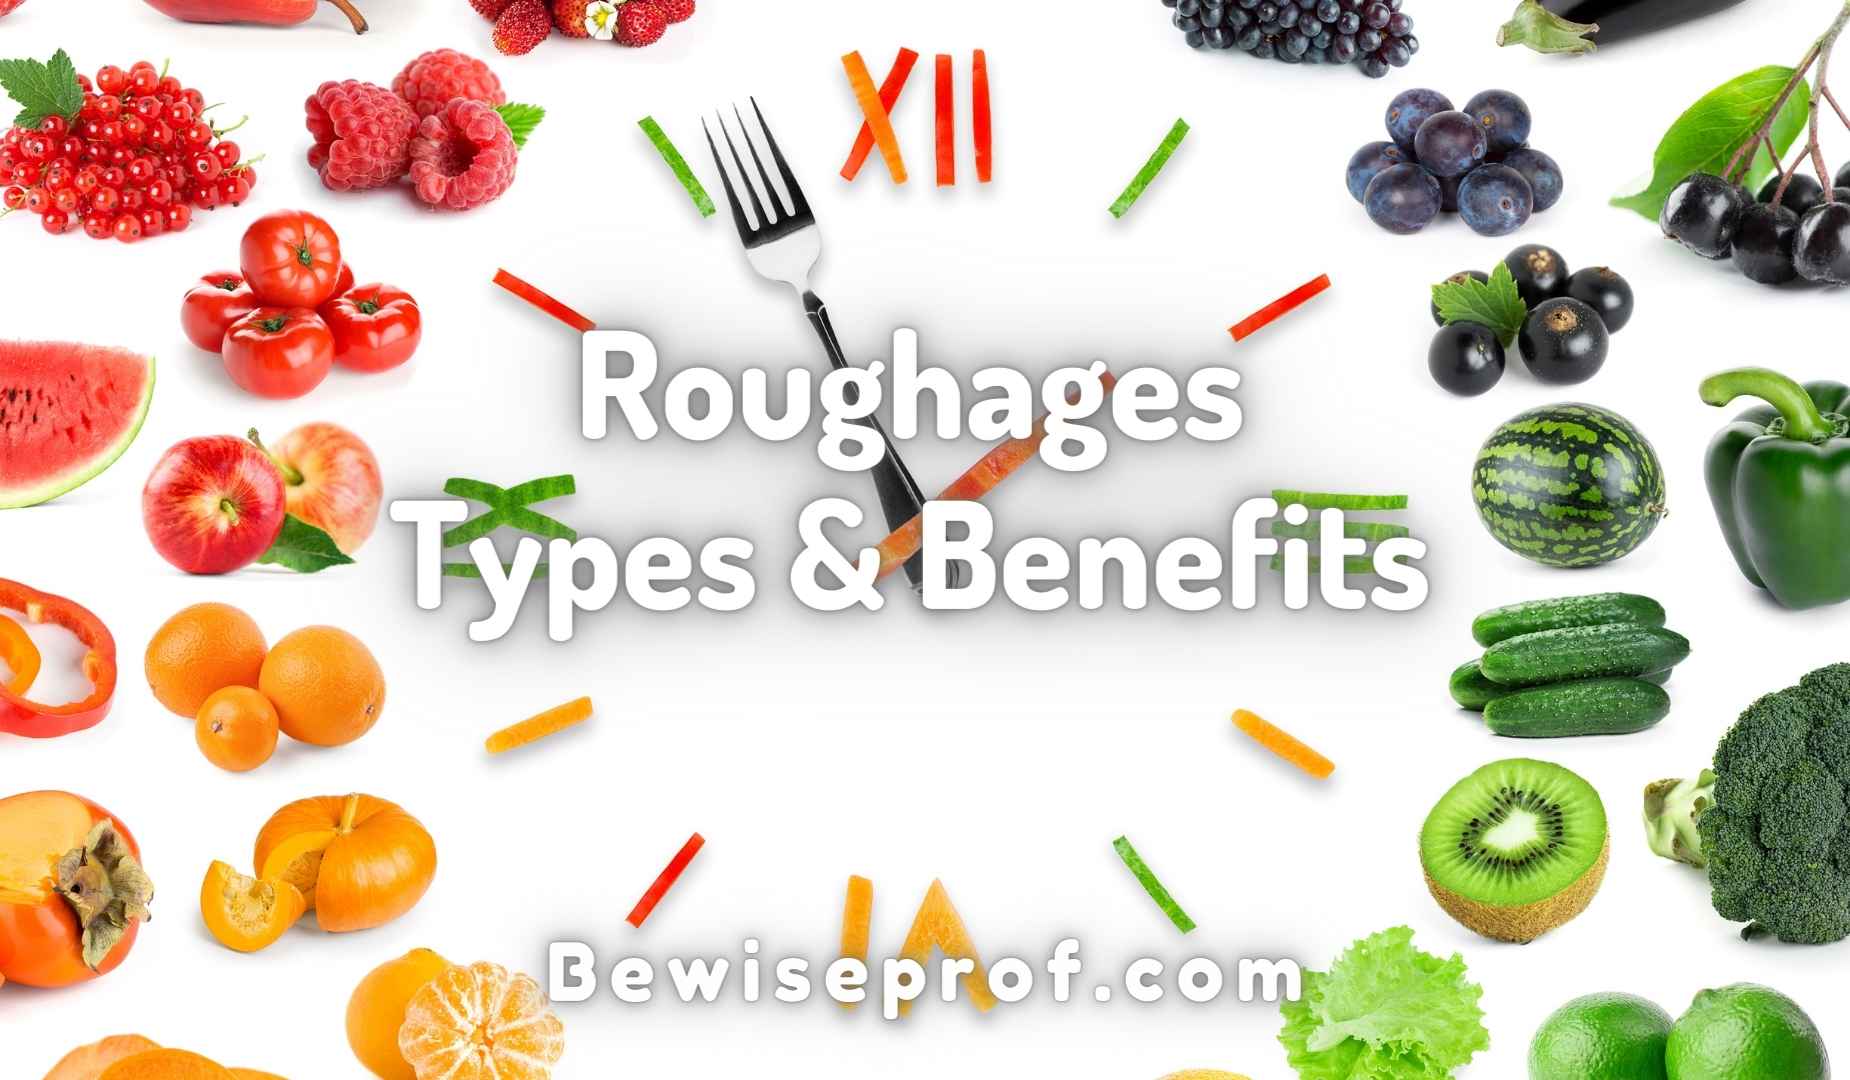 Roughages Types and Benefits